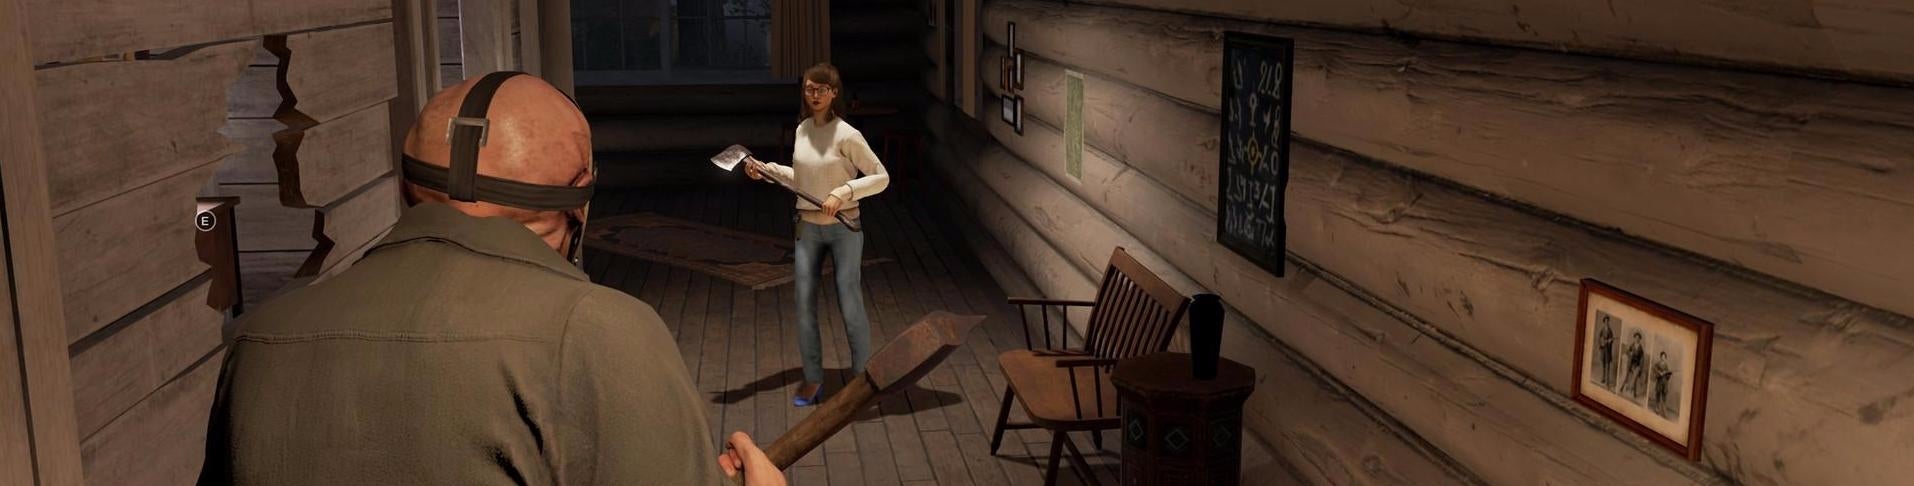 Image for Watch: Ian hunts unsuspecting teens in Friday the 13th: The Game